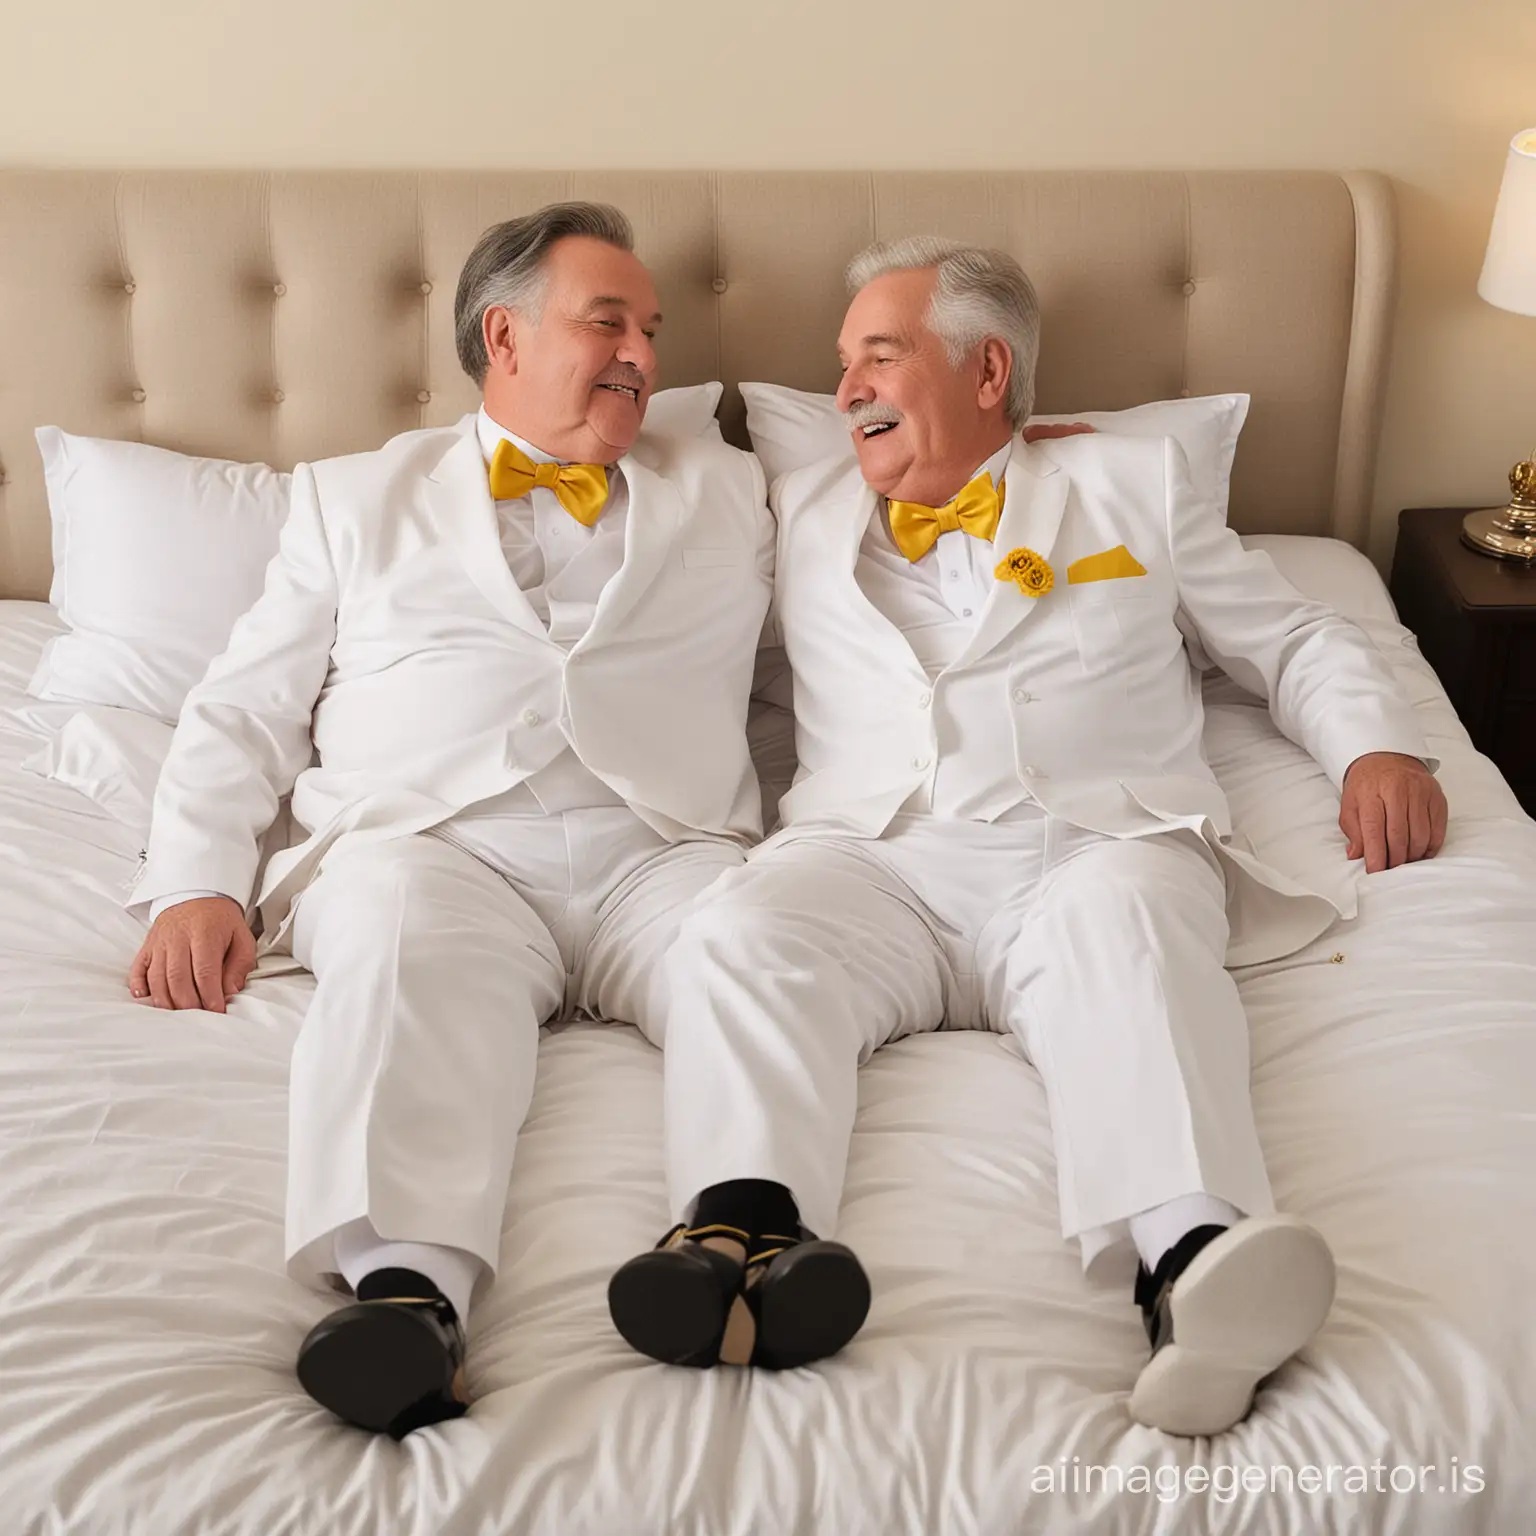 Elderly-Romance-Affectionate-Moments-of-Two-80YearOld-Men-in-White-Suits